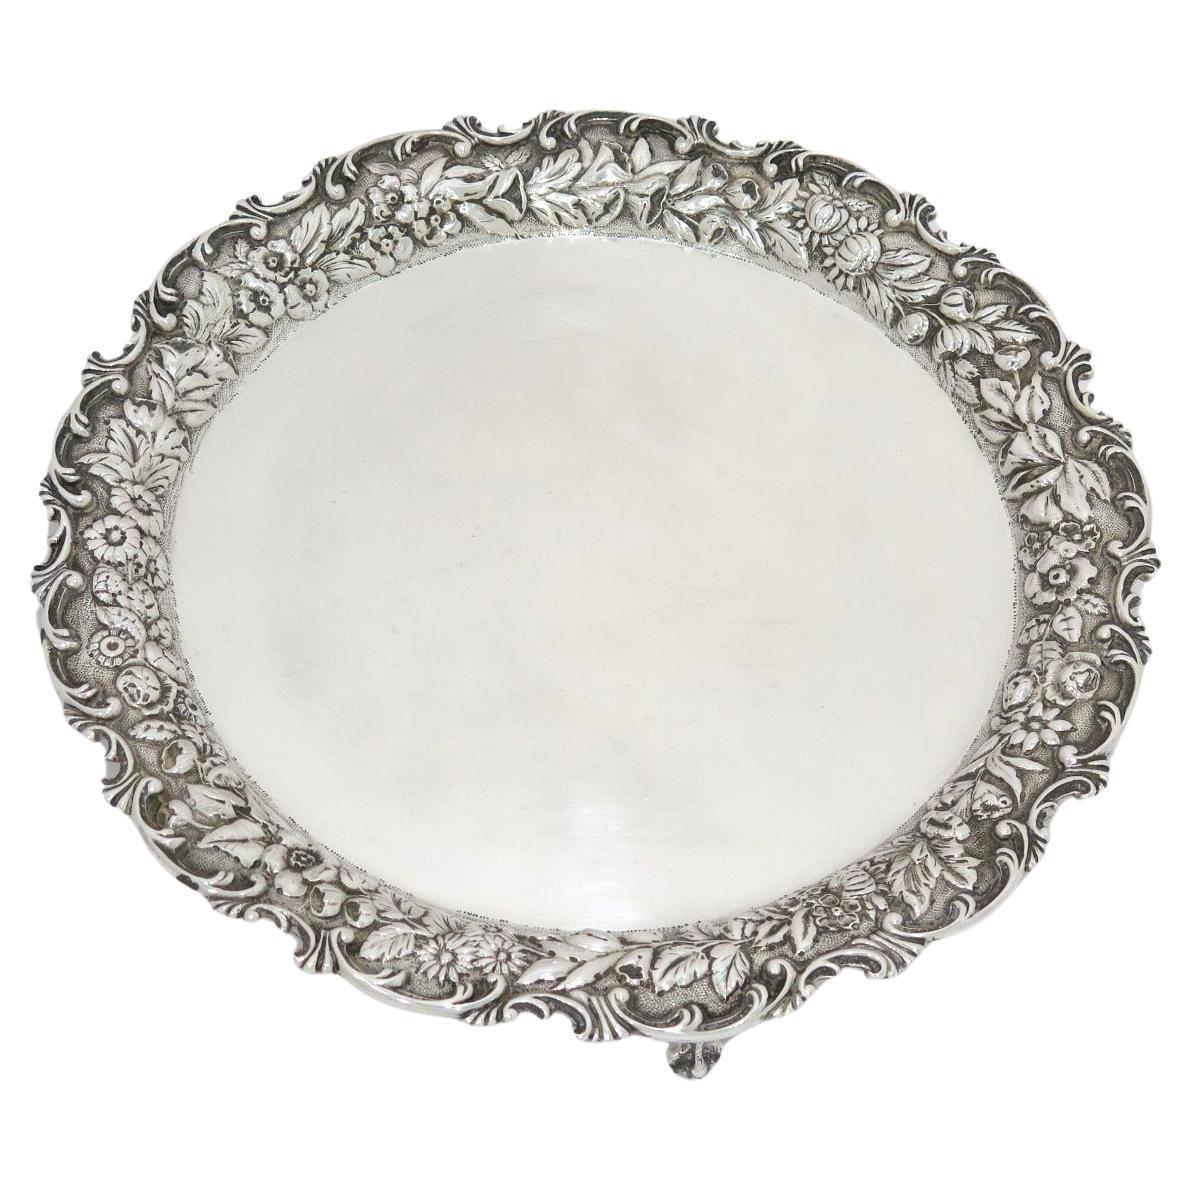 11 in - Sterling Silver S. Kirk & Sons Antique Floral Repousse Rim Footed Platter (plat à pied)